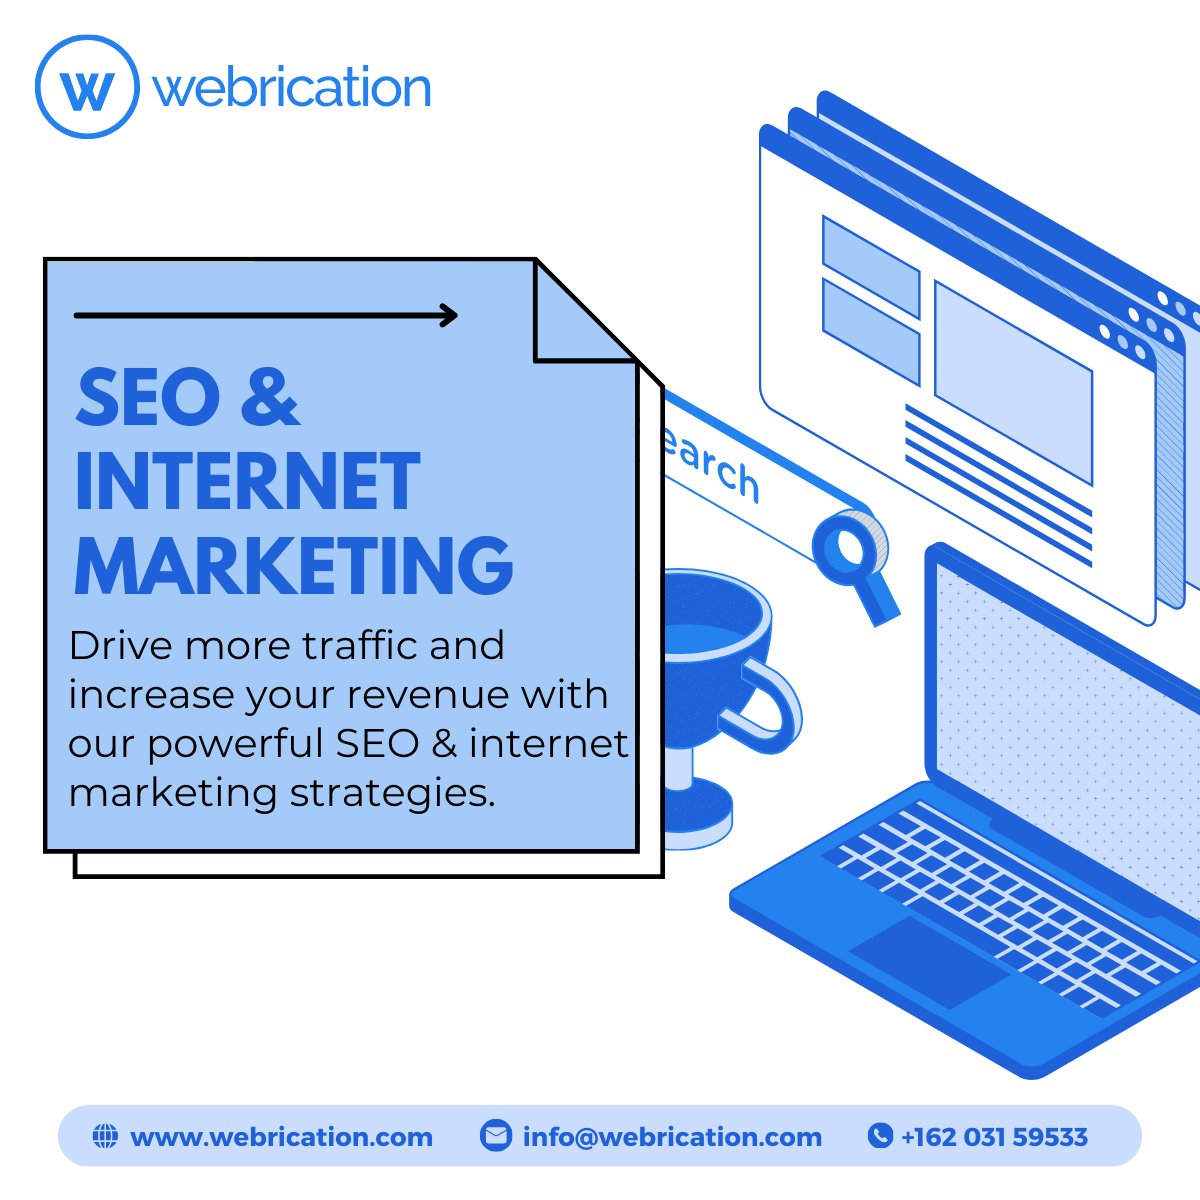 Drive more traffic and increase your revenue with our powerful SEO & internet marketing strategies.

Get a free quote
Contact us at: info@webrication.com

#websitedesign #developmentservices #digitalmarketingagency #softwaredevelopment #mobiledevelopment #ecommercedevelopment